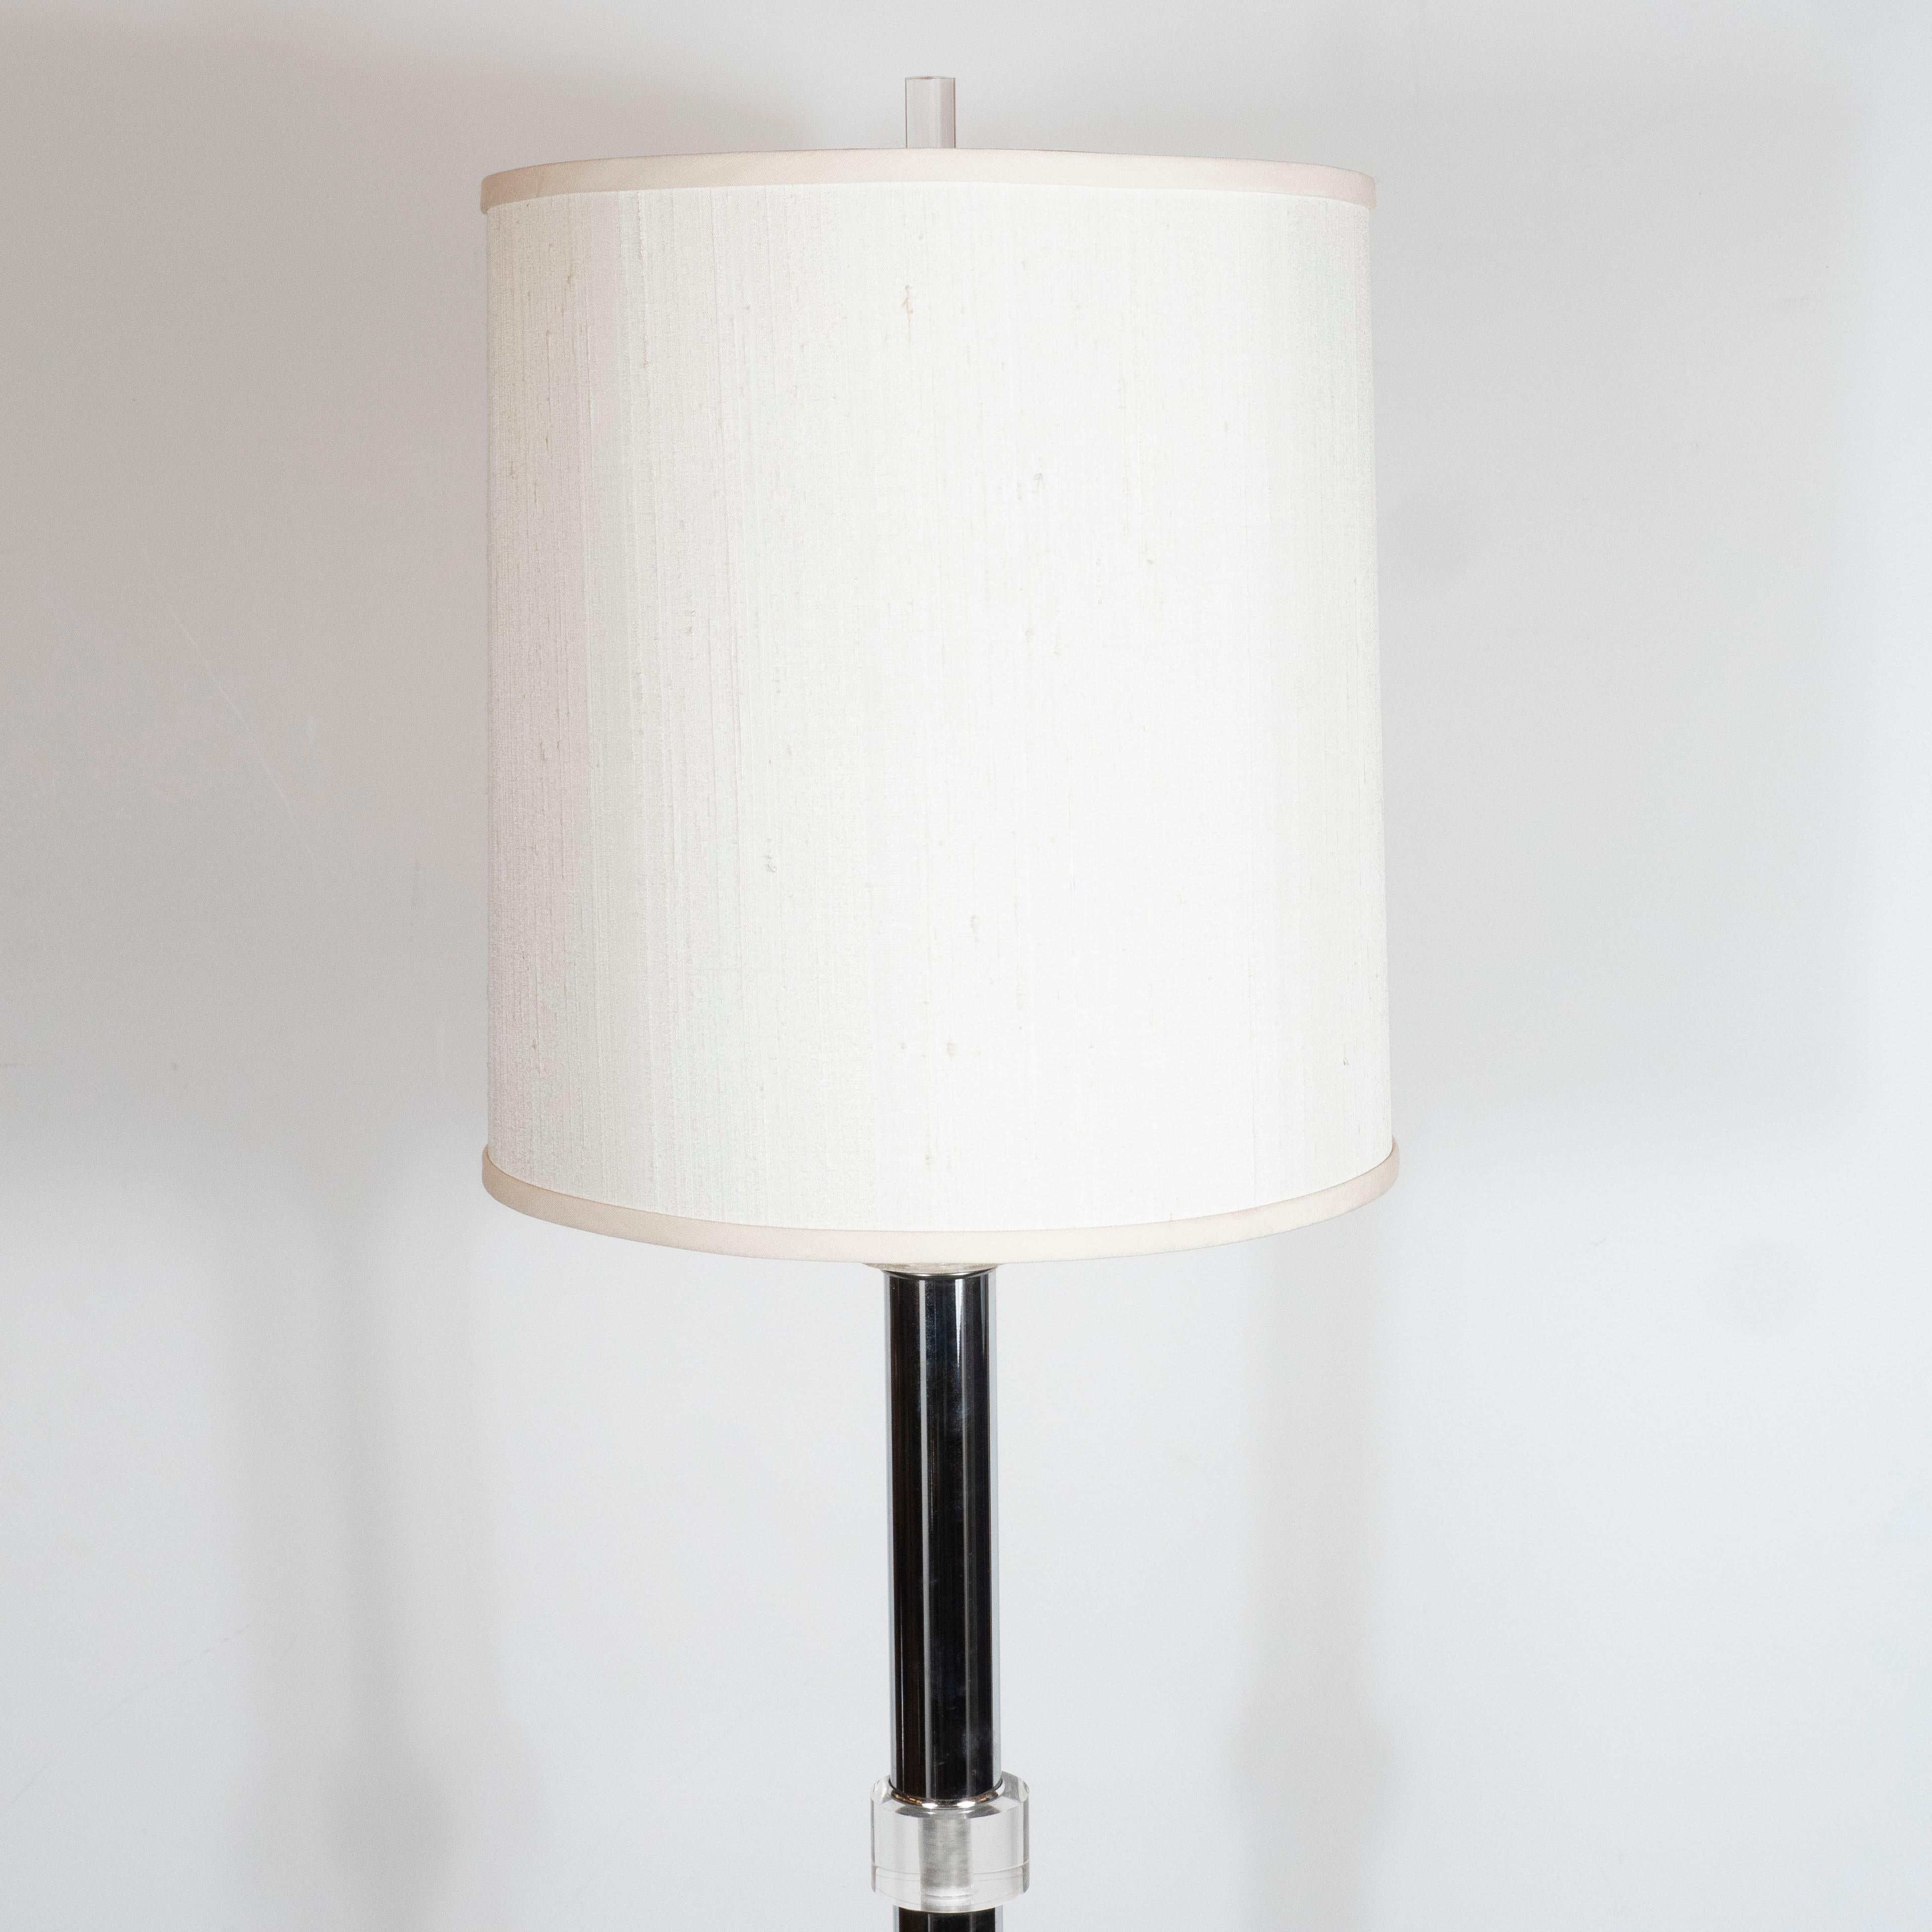 Polished Mid-Century Modern Banded Lucite and Chrome Floor Lamp